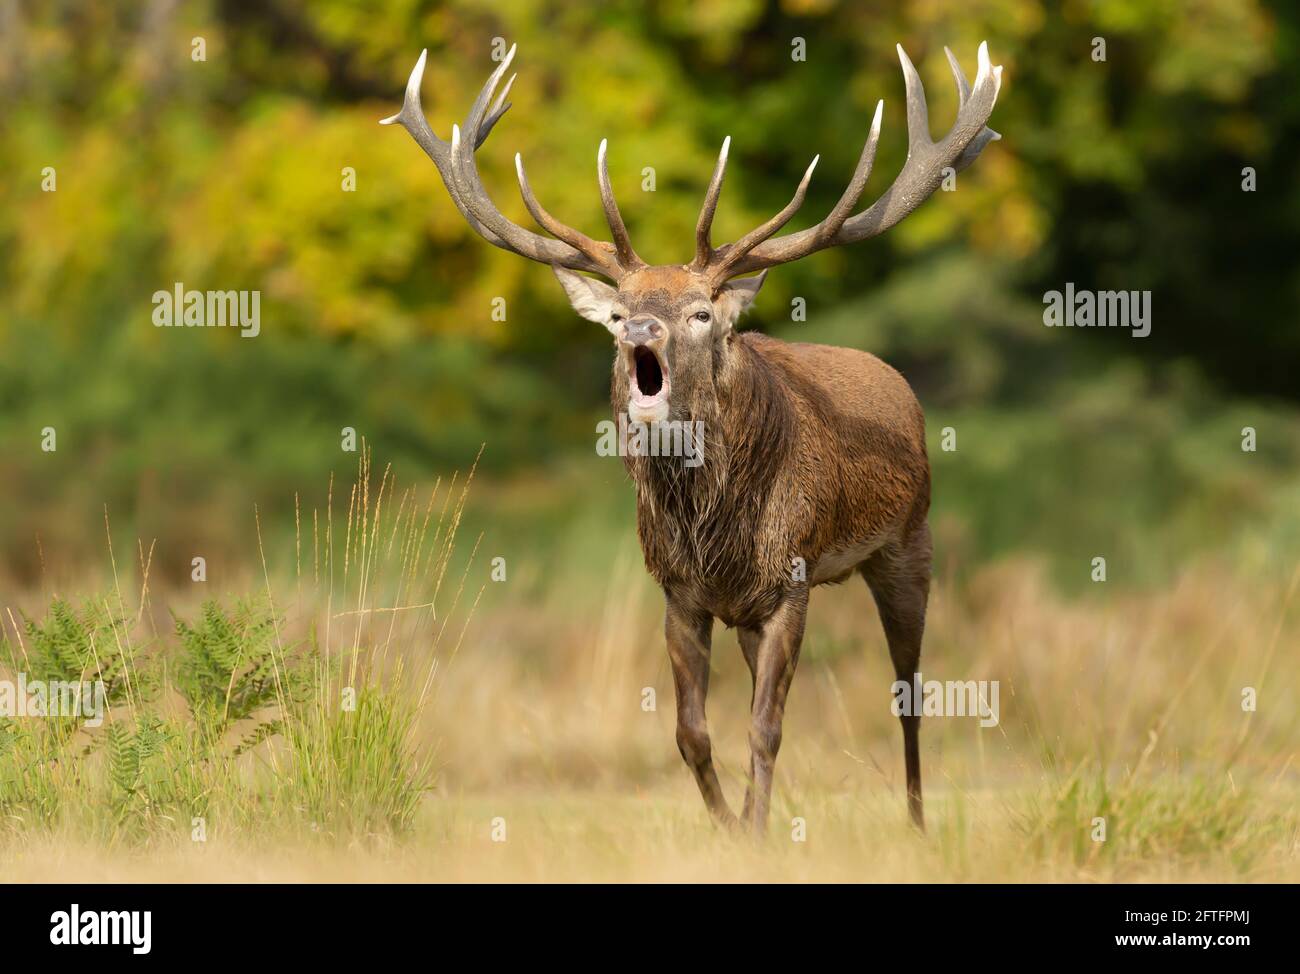 Close-up of a red deer stag calling during rutting season in autumn, UK. Stock Photo